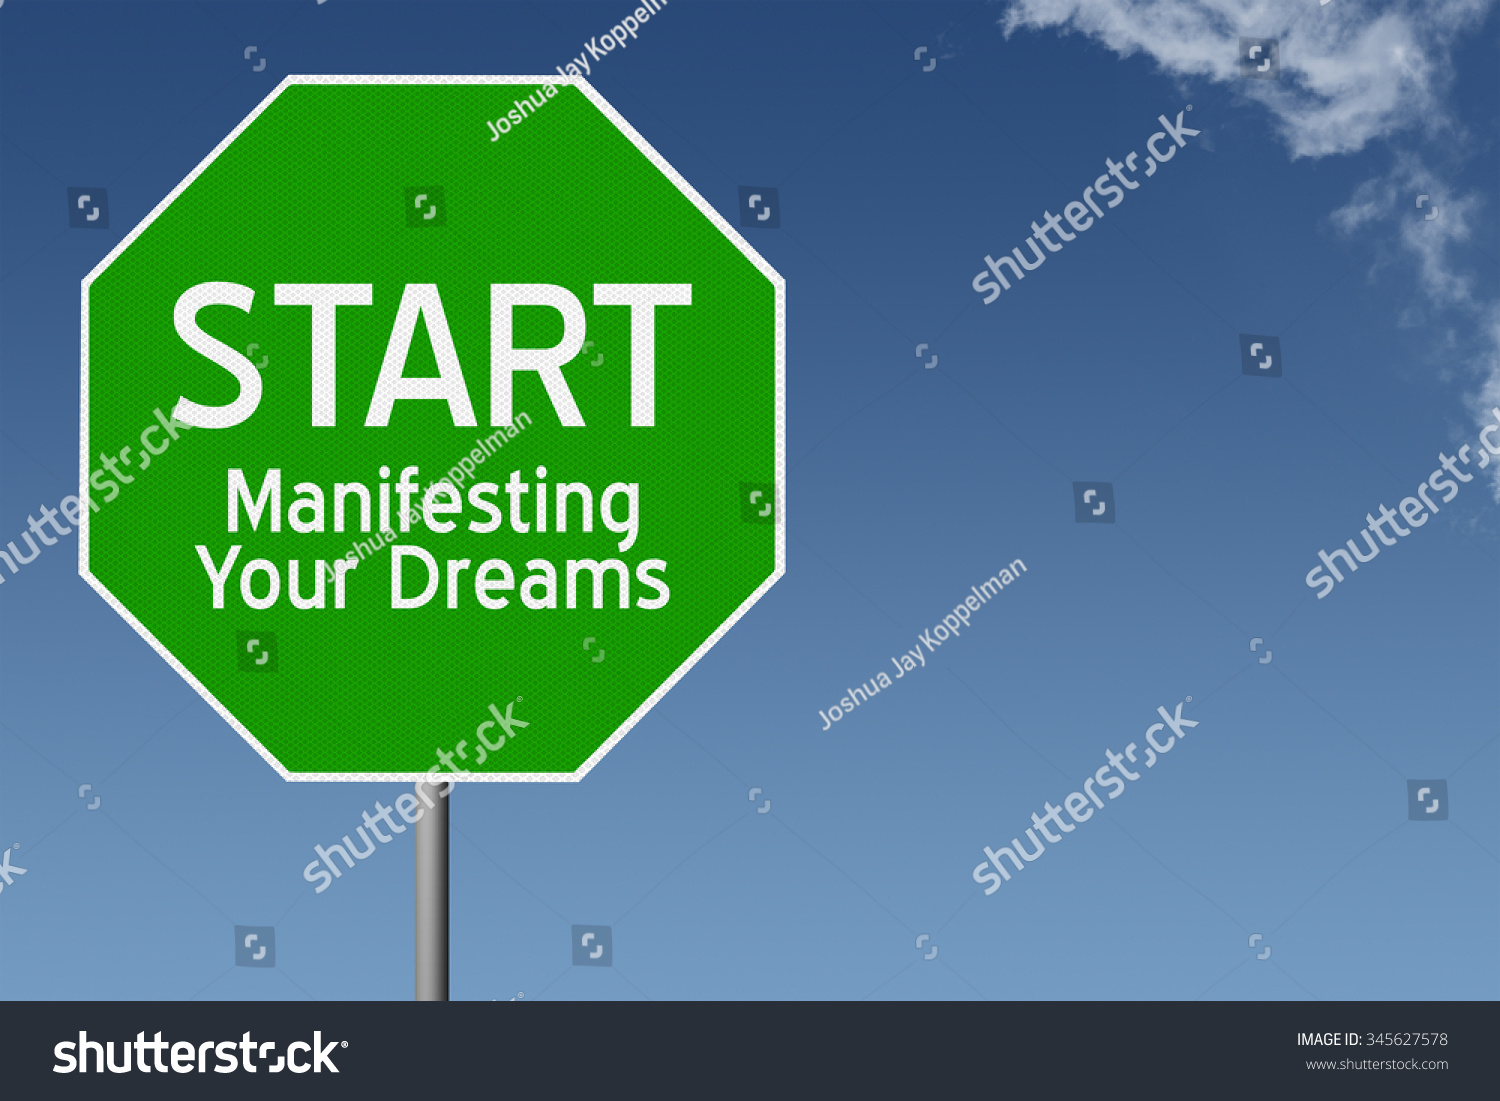 Start Manifesting Your Dreams text on green stop sign with blue sky background and copy space #345627578